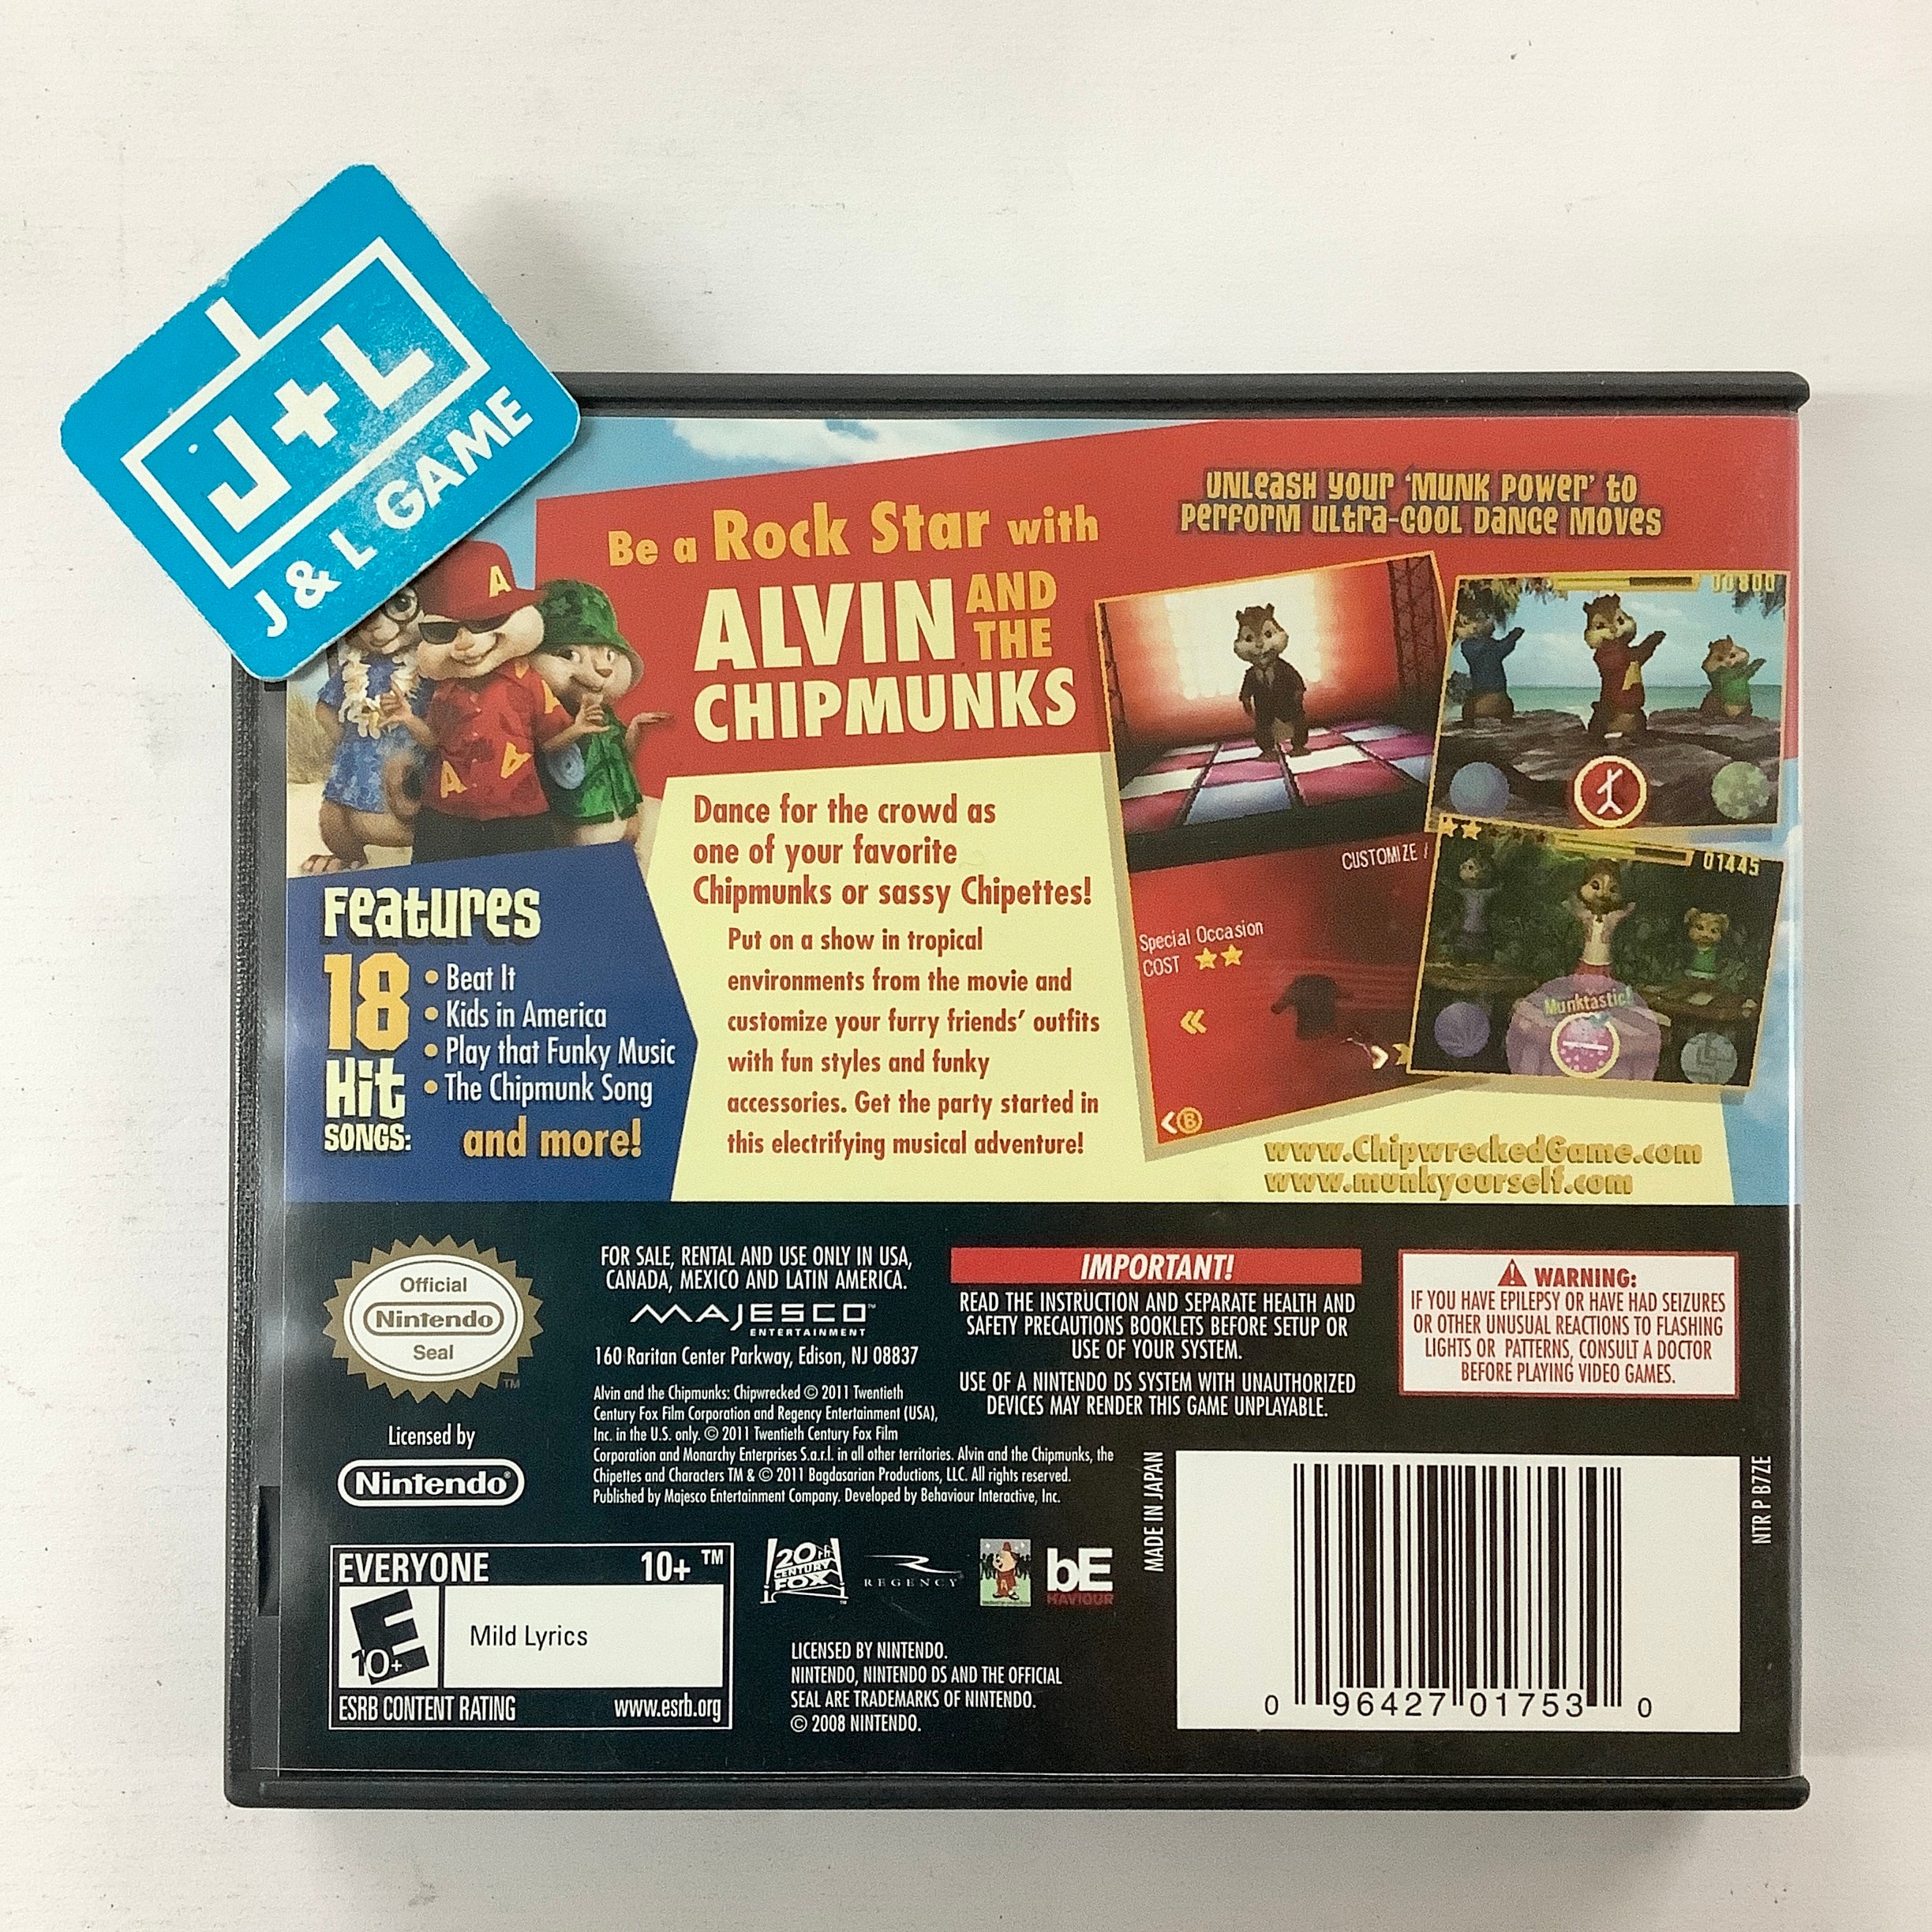 Alvin and the Chipmunks: Chipwrecked - (NDS) Nintendo DS [Pre-Owned] Video Games Majesco   